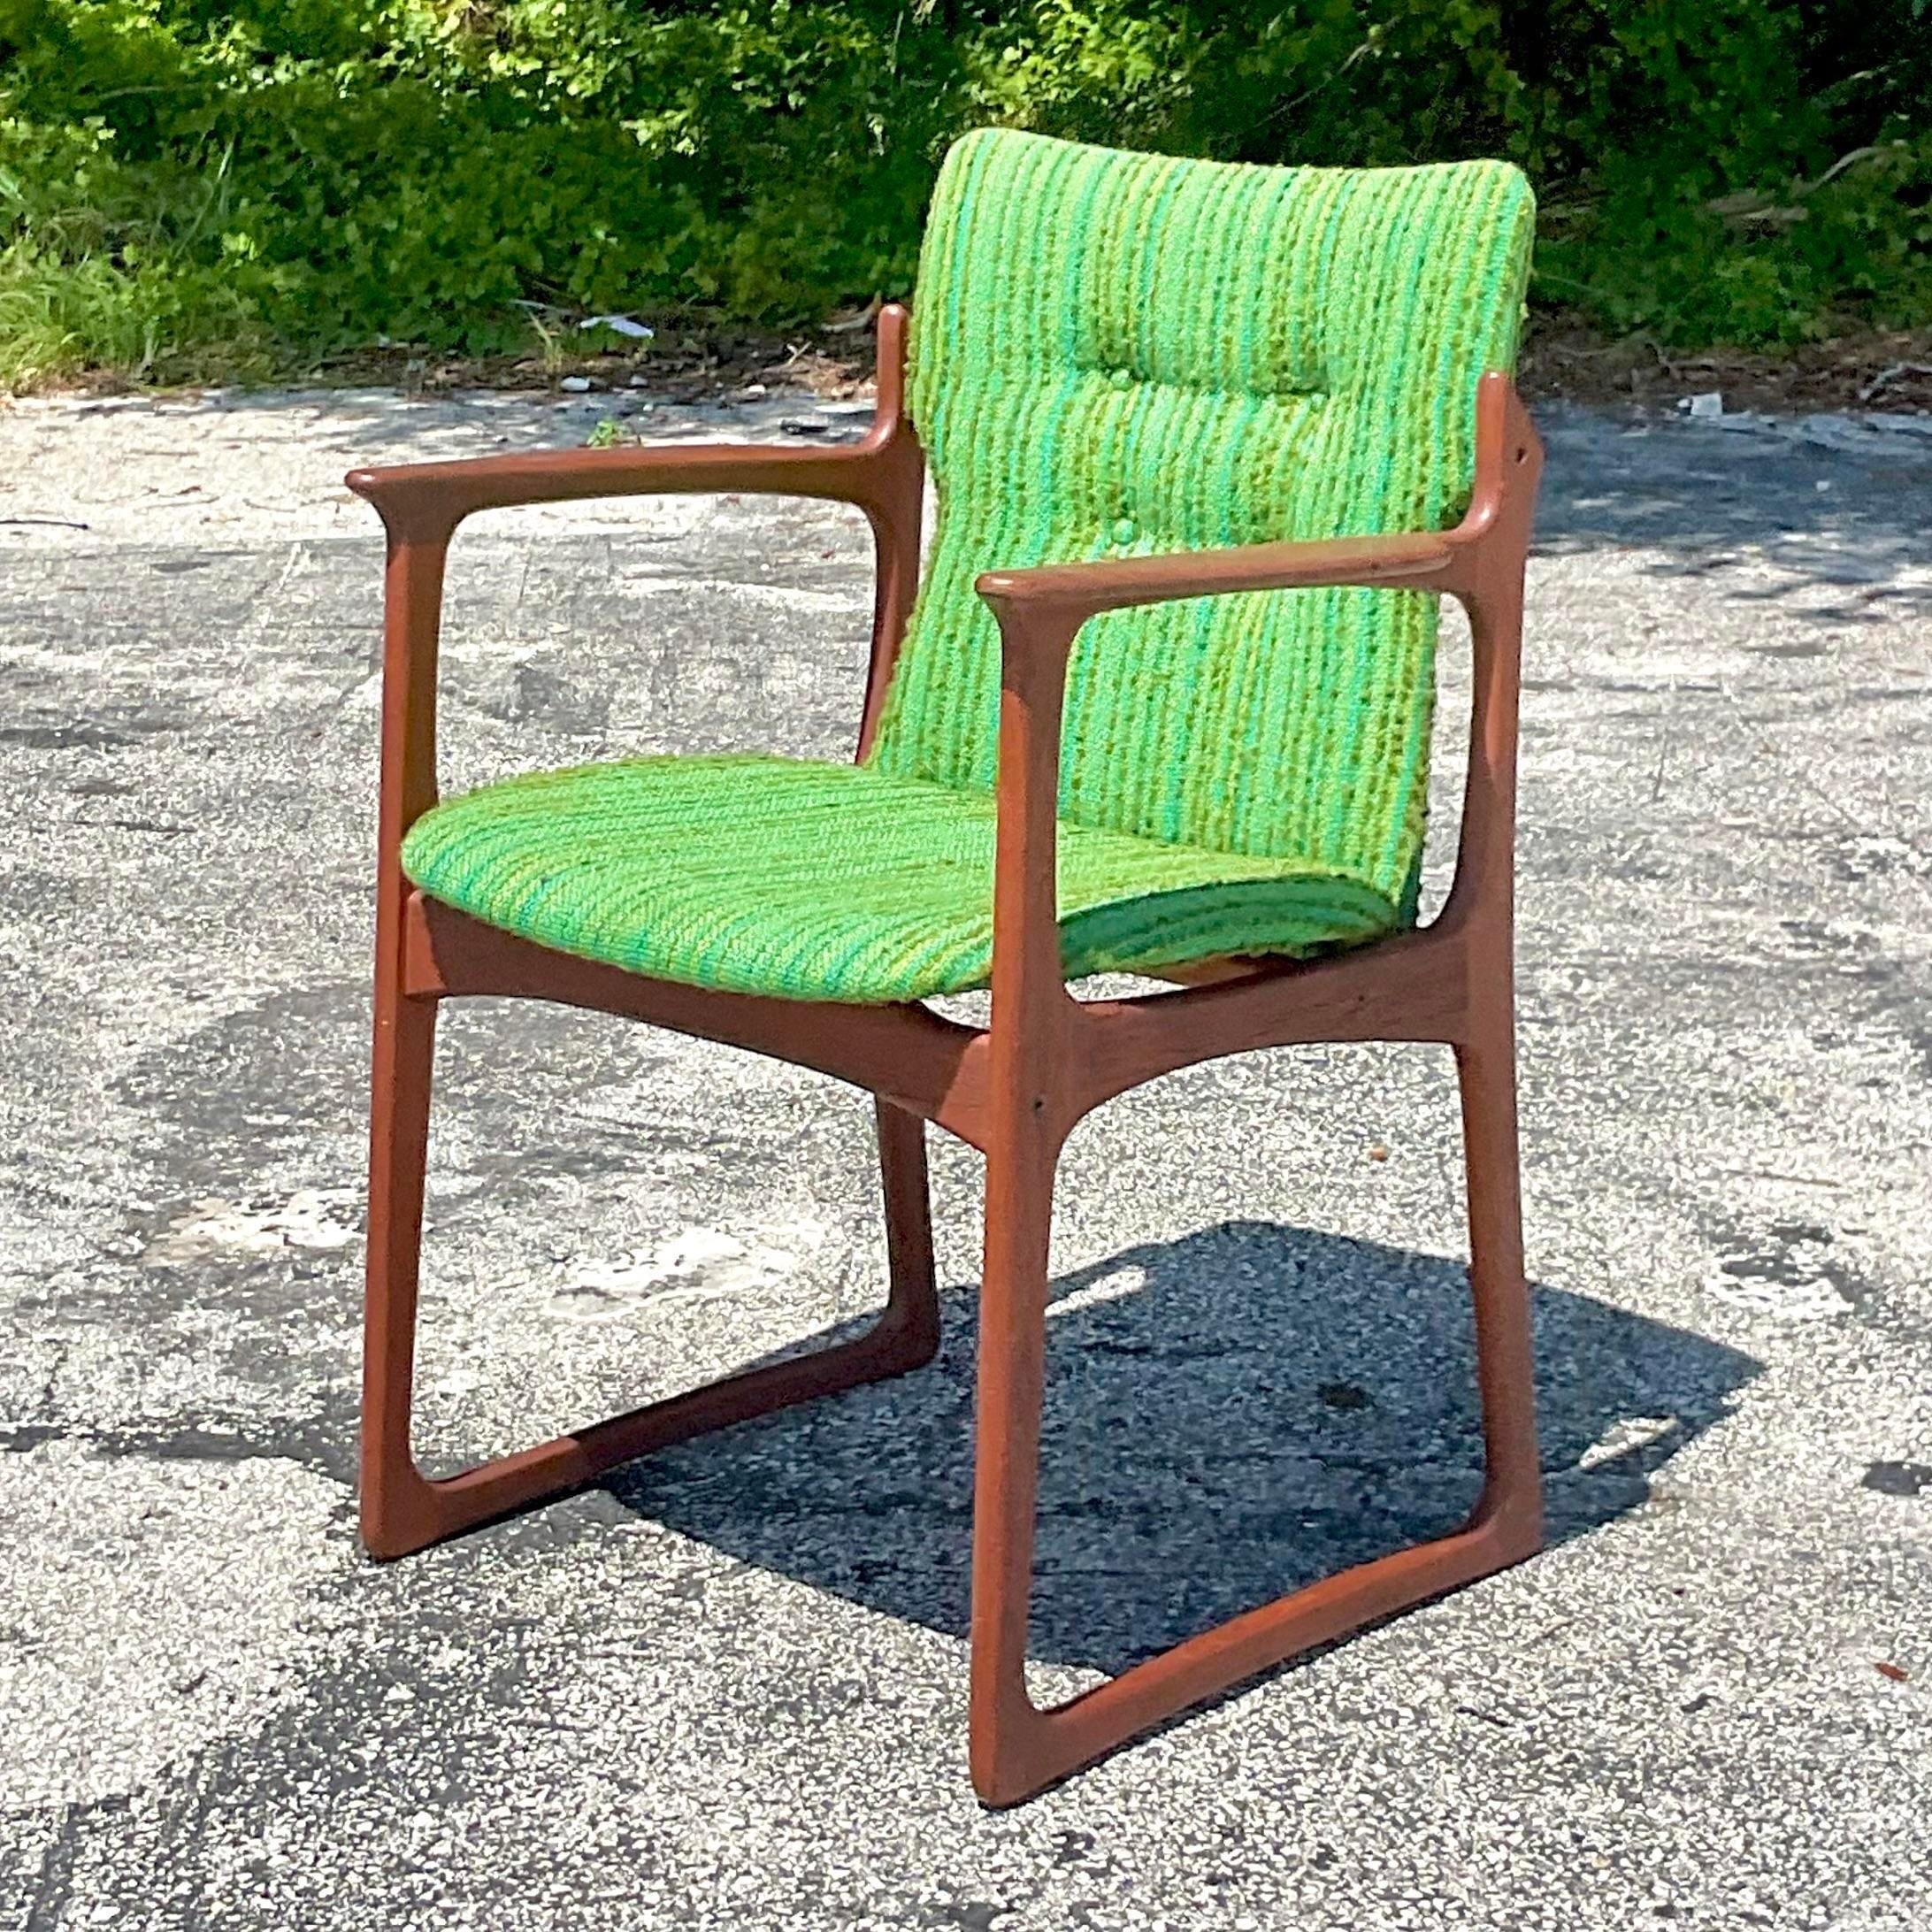 A fantastic vintage Danish arm chair. Made by the coveted Vamdrup Stolefabrik group. Marked Made in Denmark on the bottom. A beautiful original green striped boucle upholstery. Acquired from a Palm Beach estate.